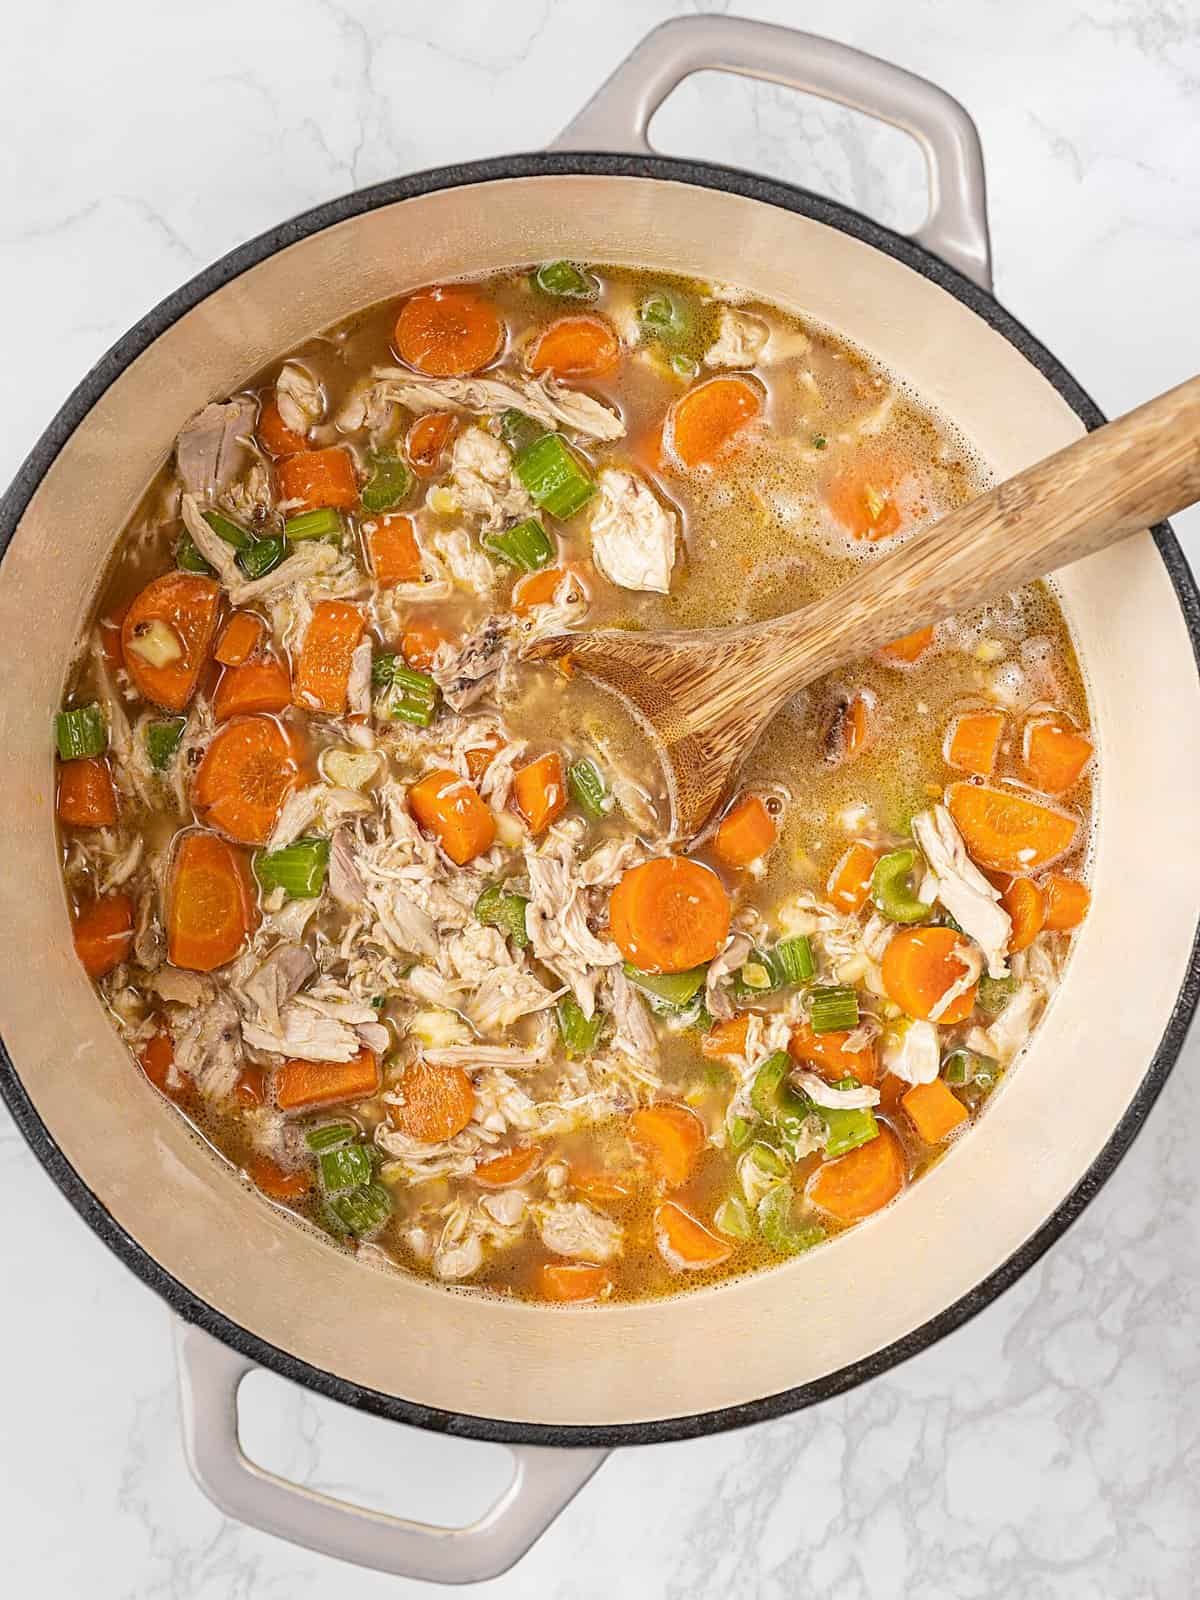 Stirring chicken, vegetables, and broth